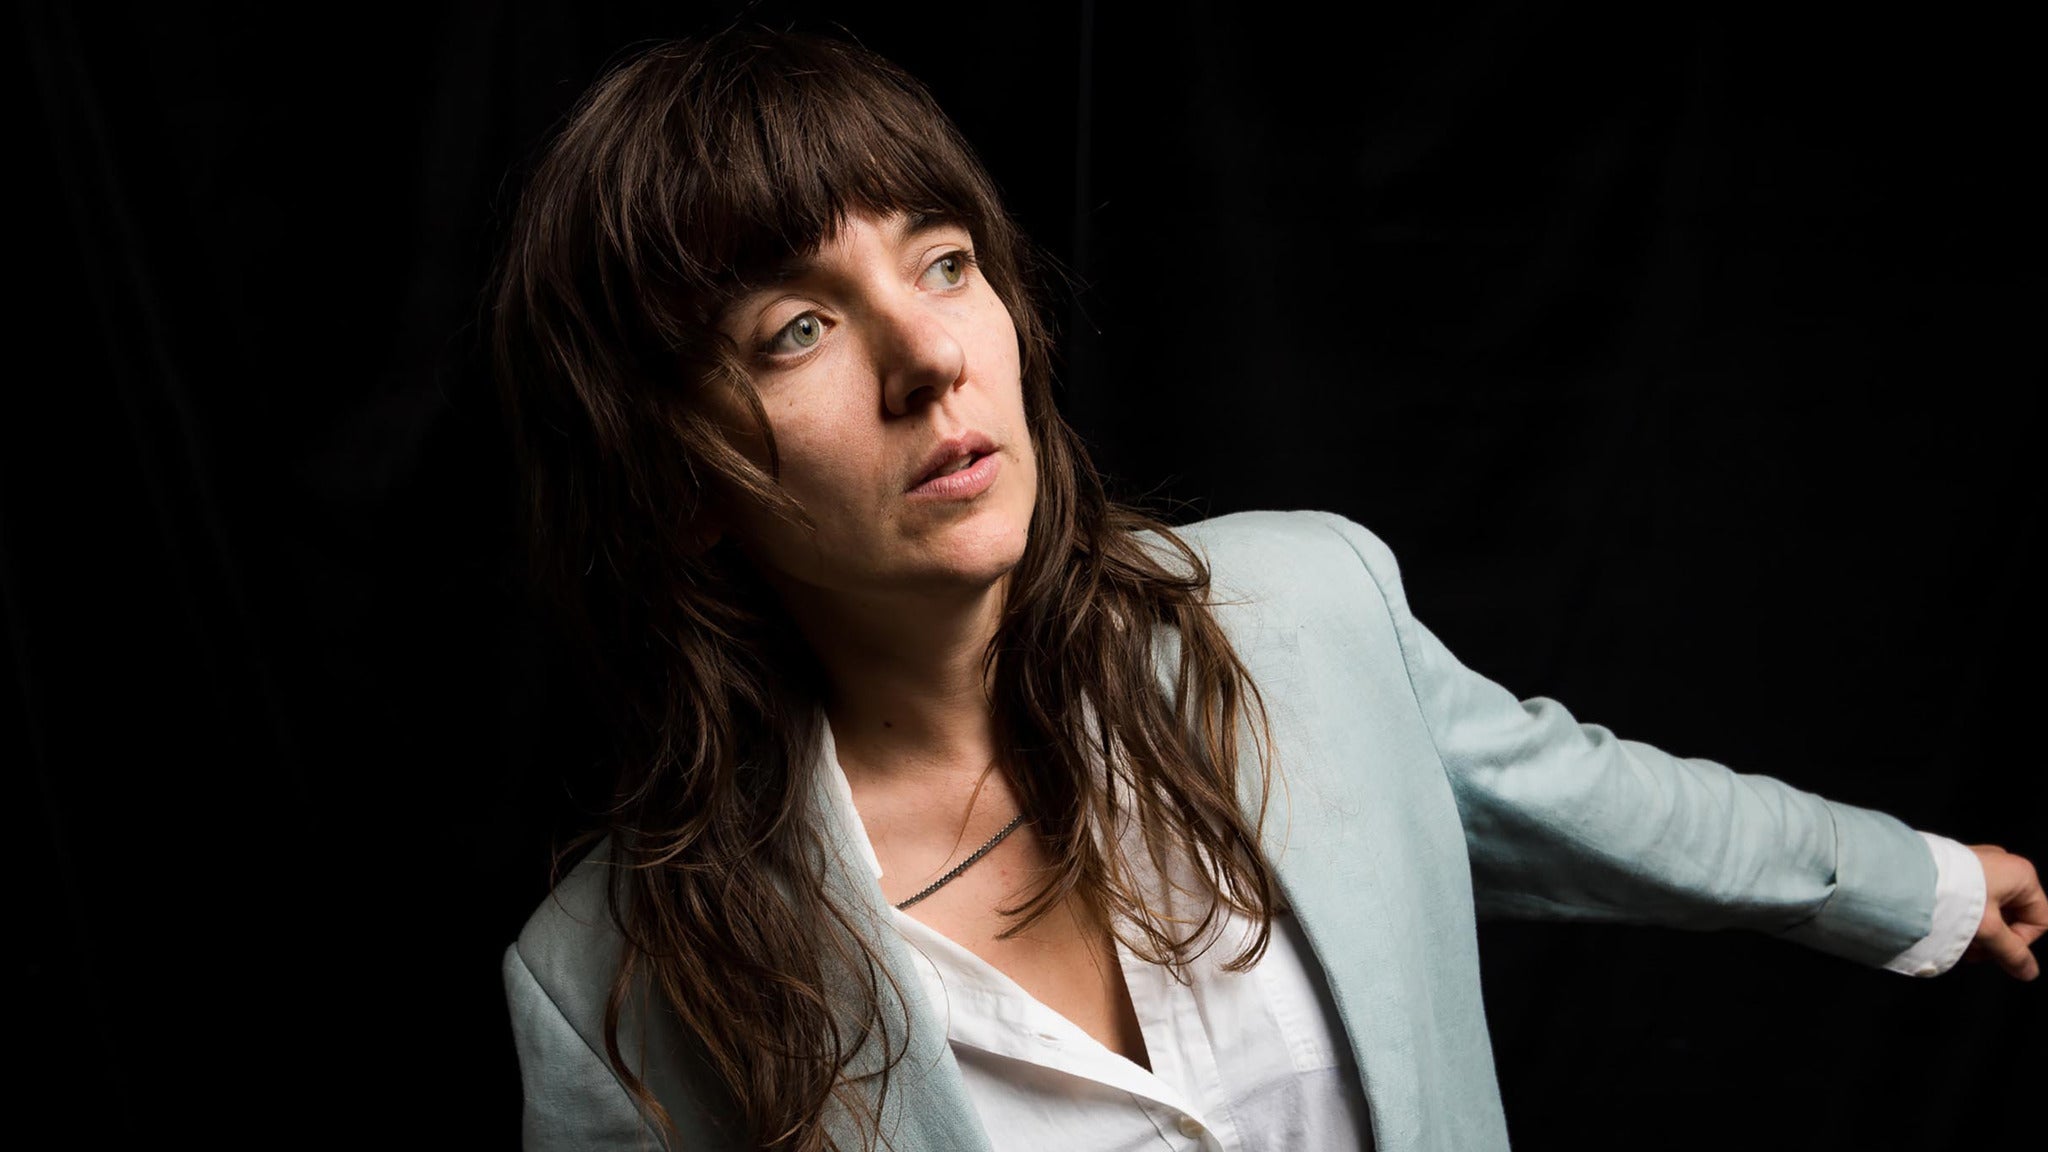 Image used with permission from Ticketmaster | Courtney Barnett tickets